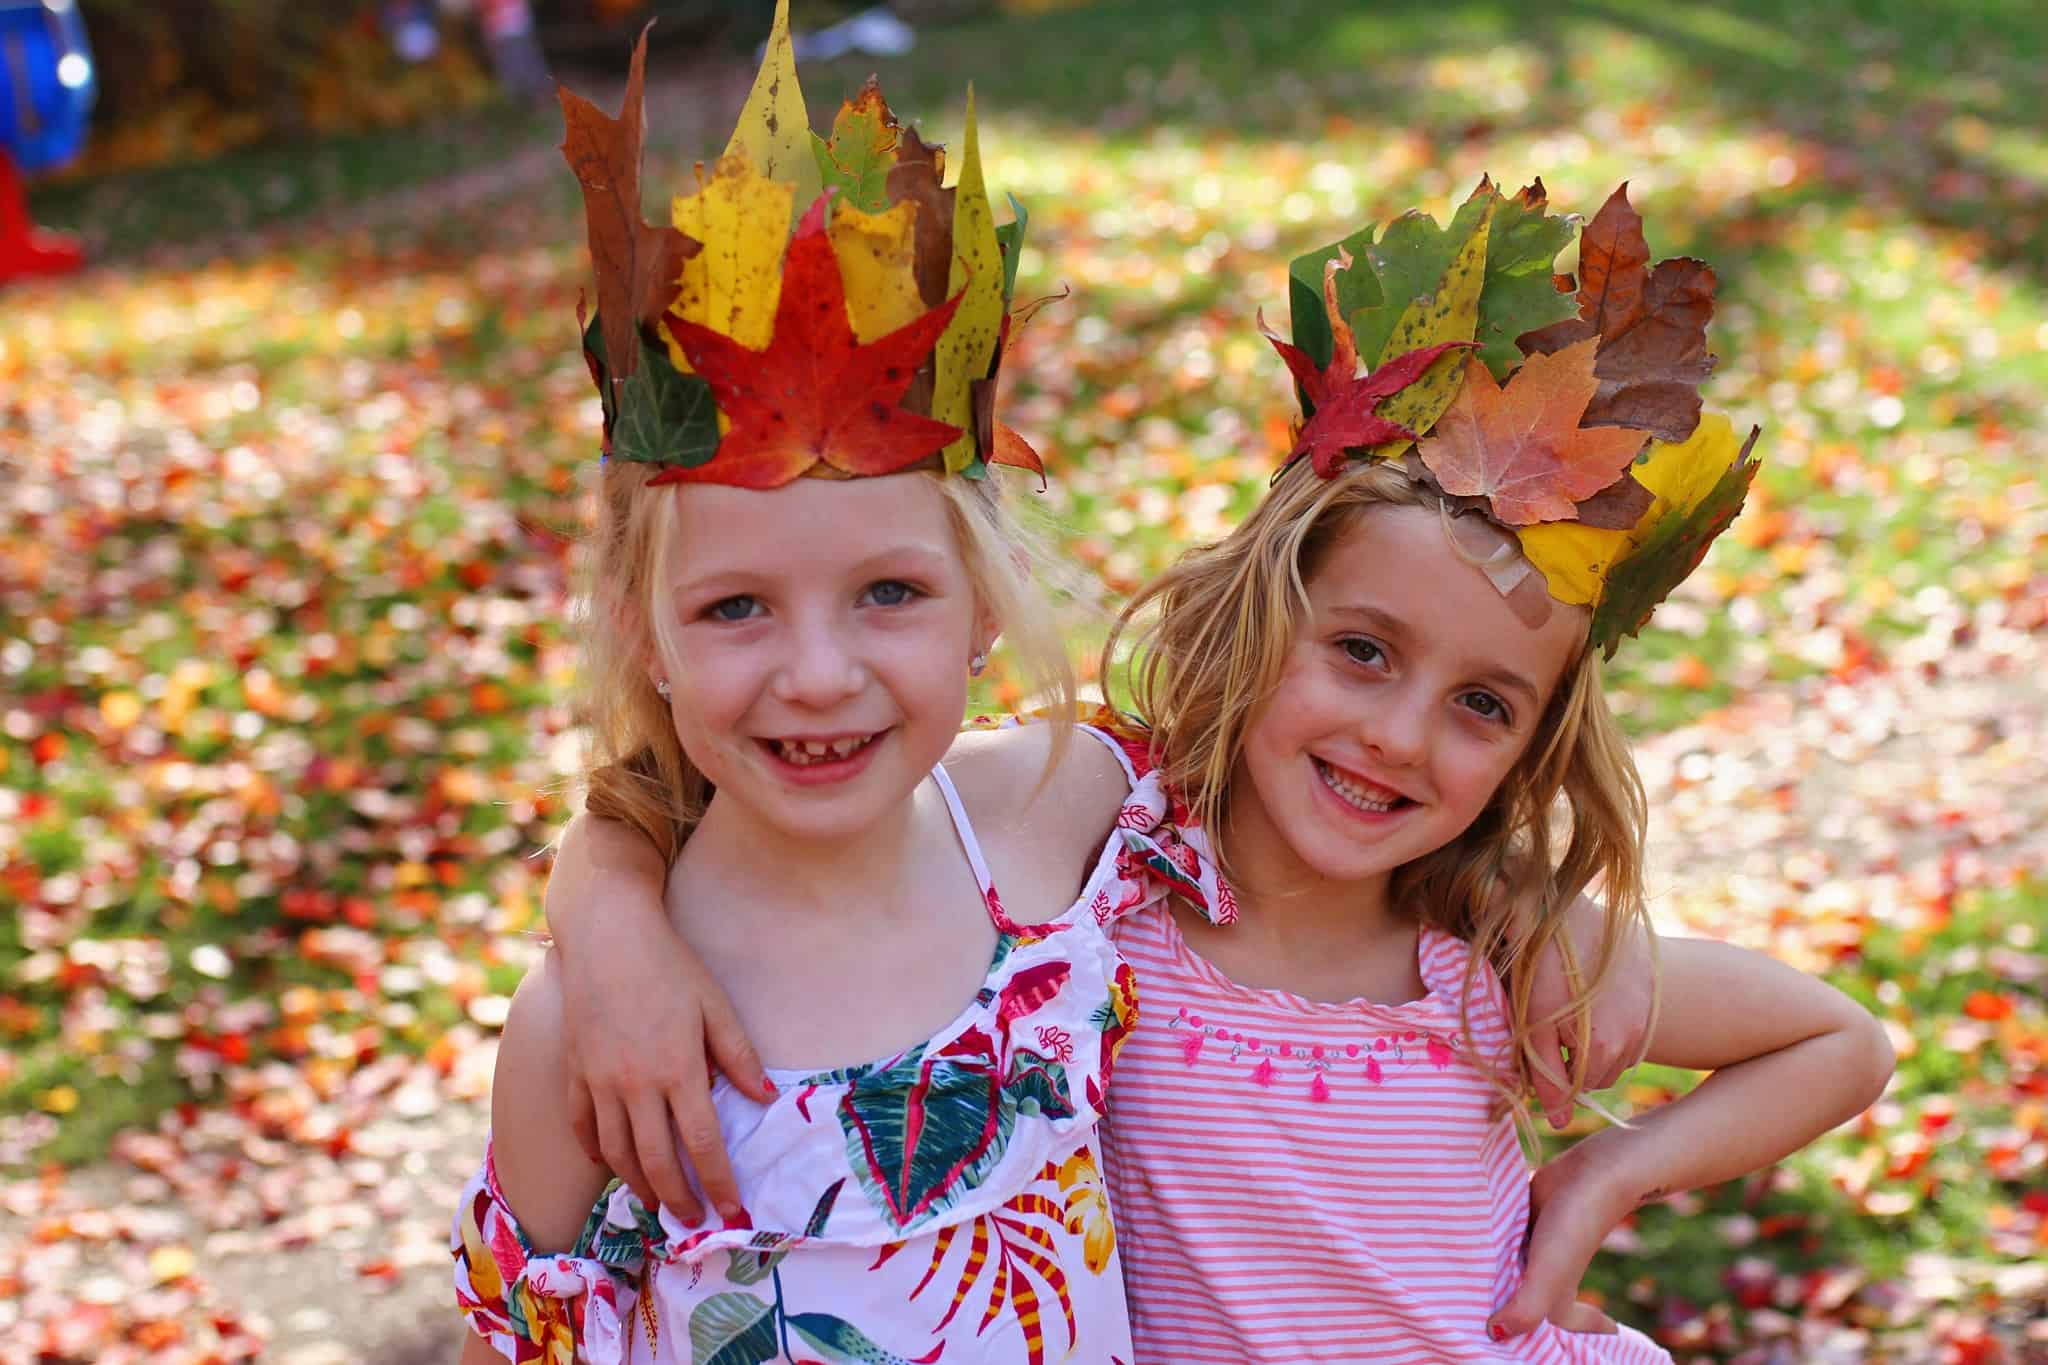 How to make fall leaf crowns - fall leaf fun crafts for kids